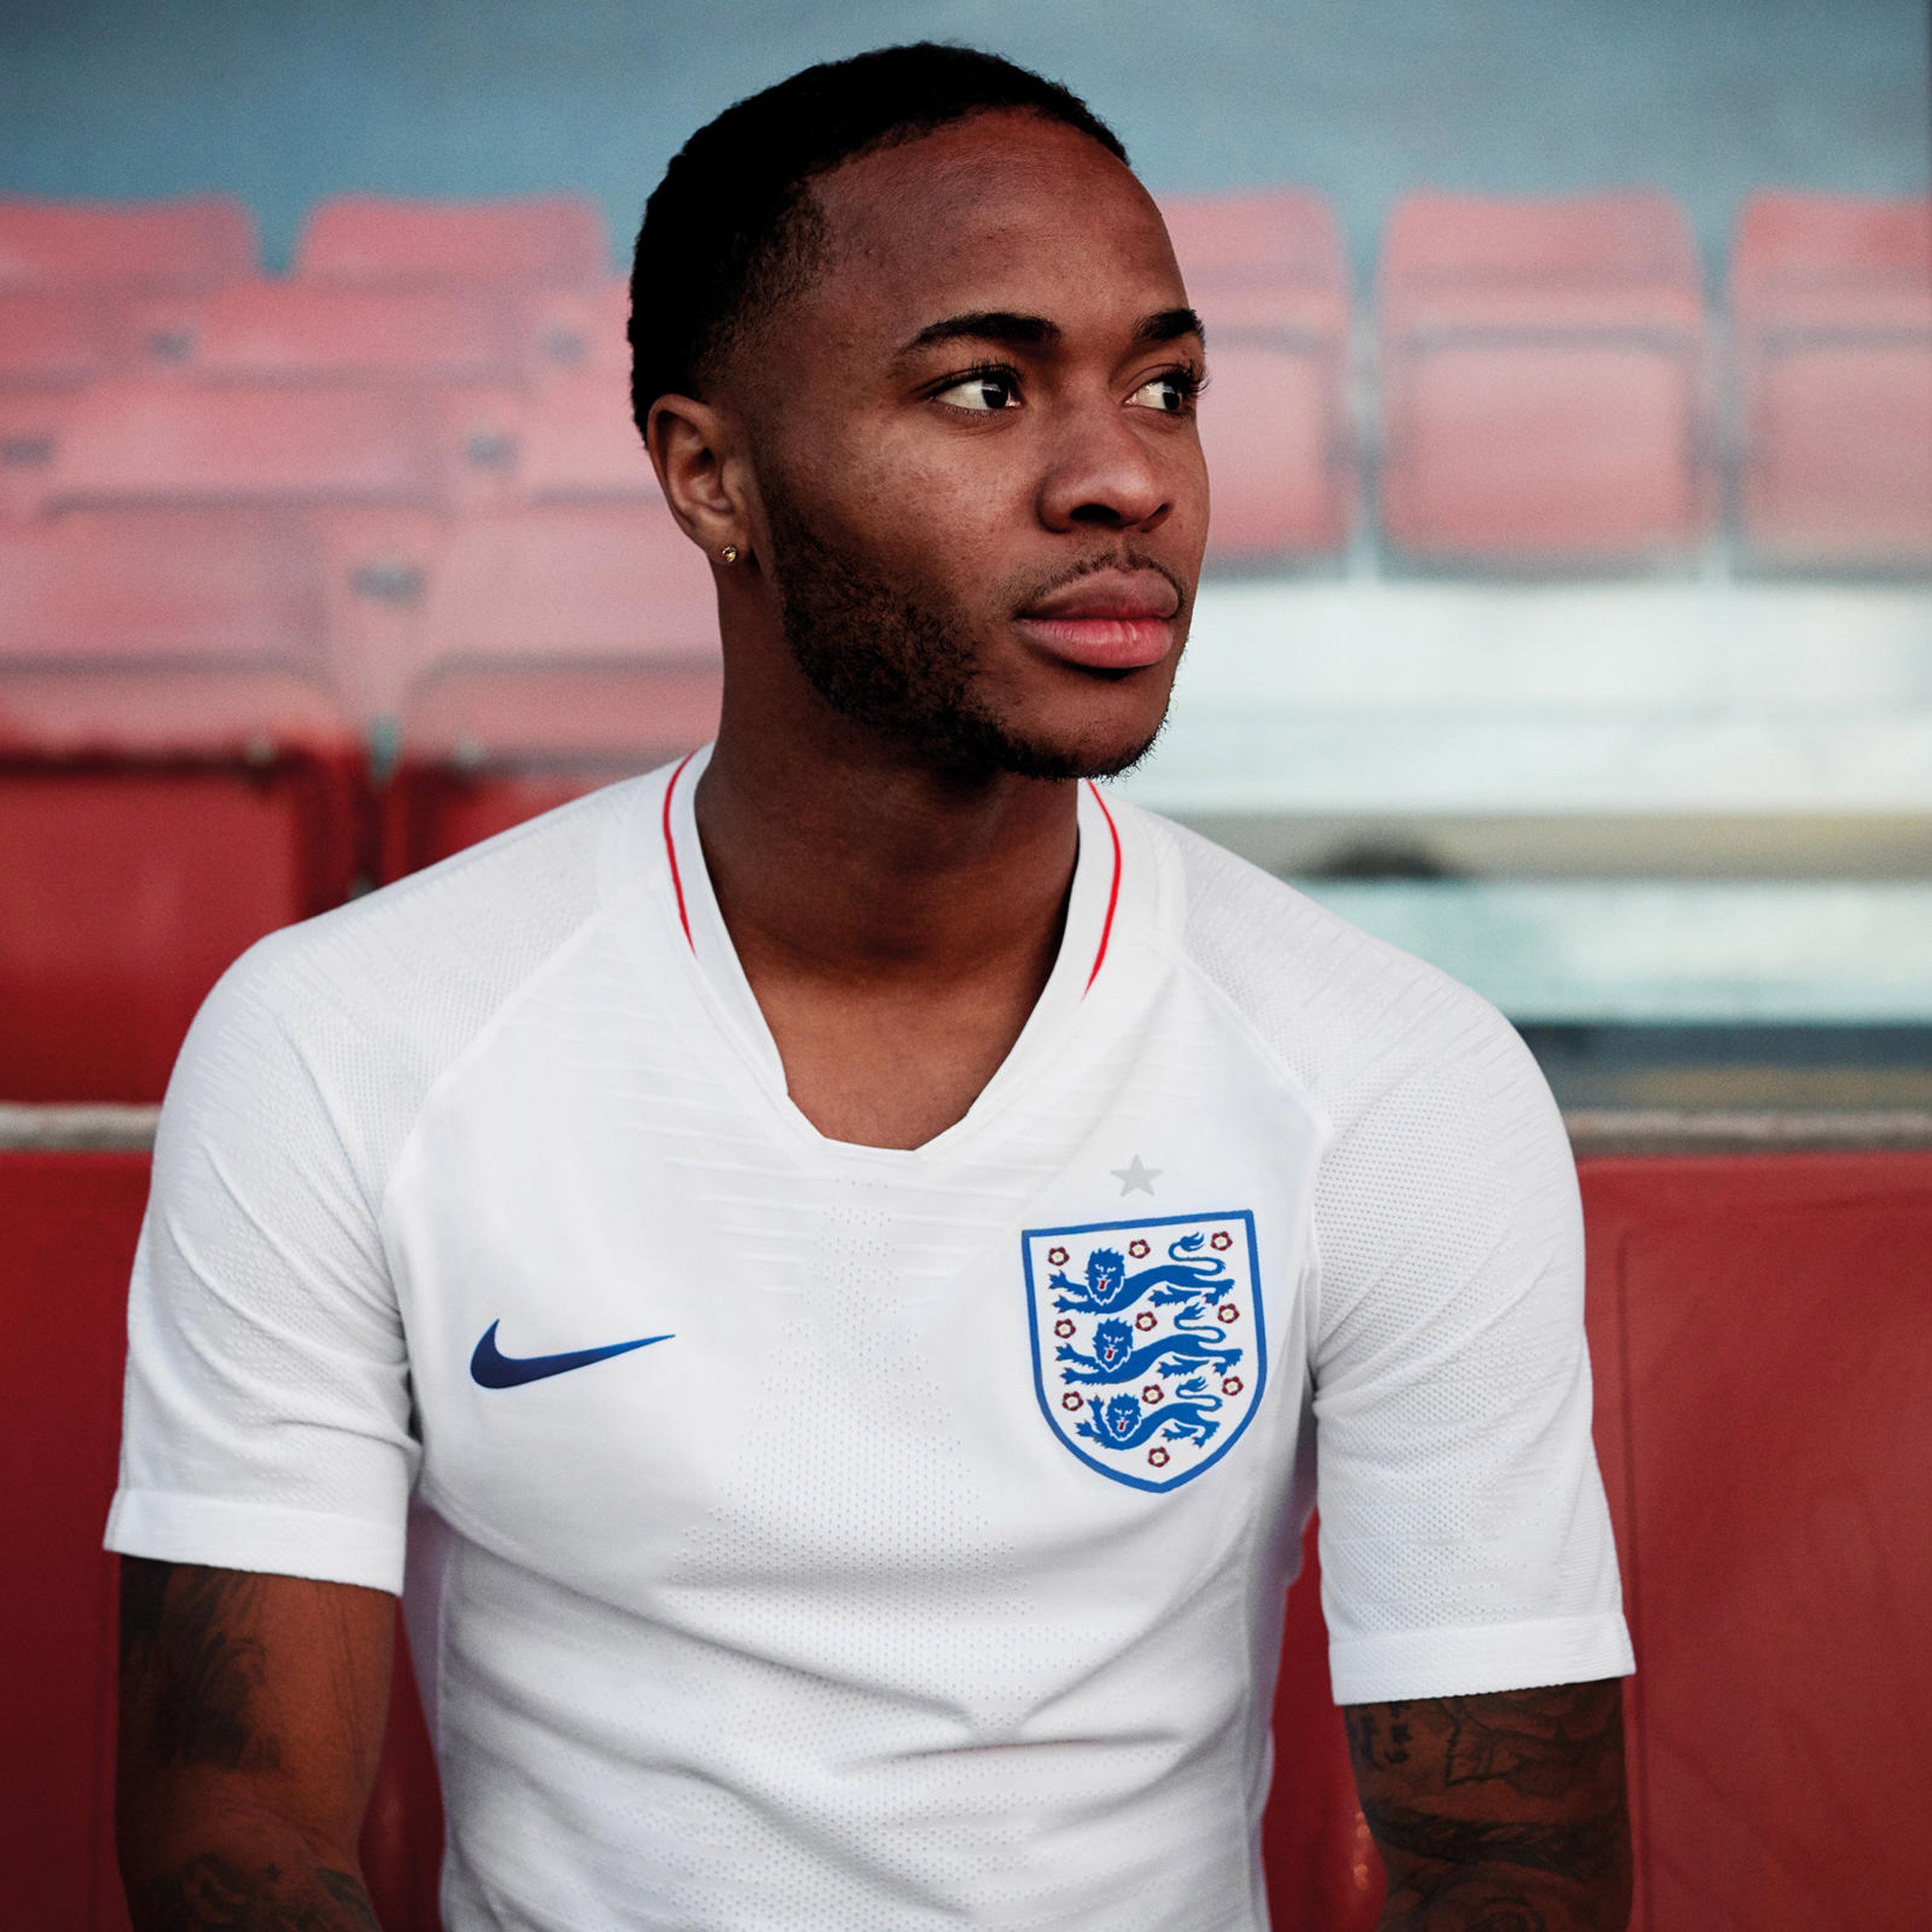 Nike unveils World Cup 2018 kits for England and